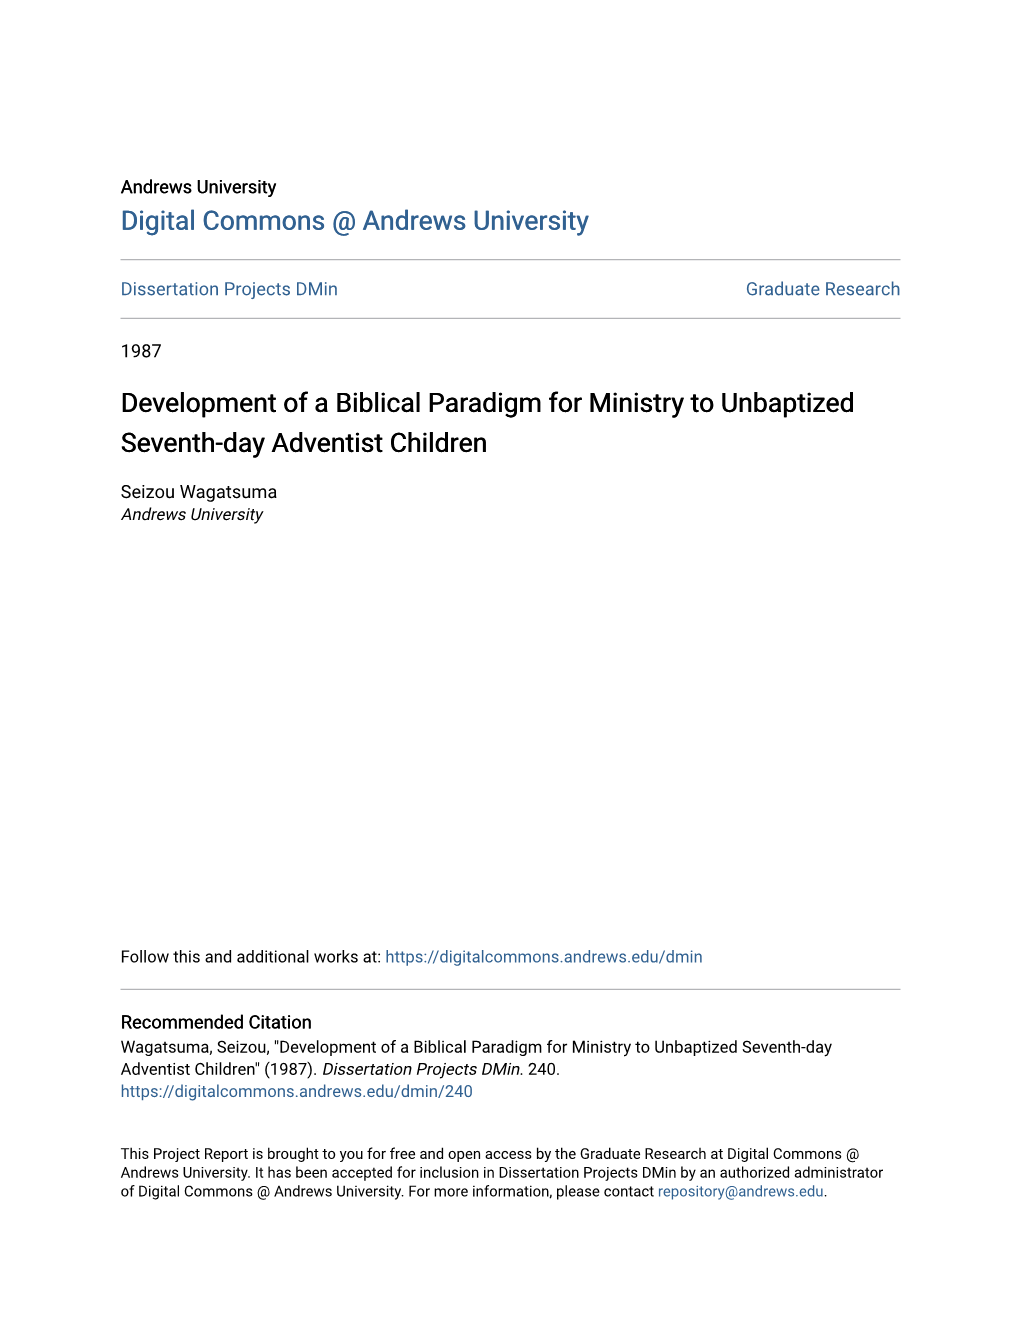 Development of a Biblical Paradigm for Ministry to Unbaptized Seventh-Day Adventist Children